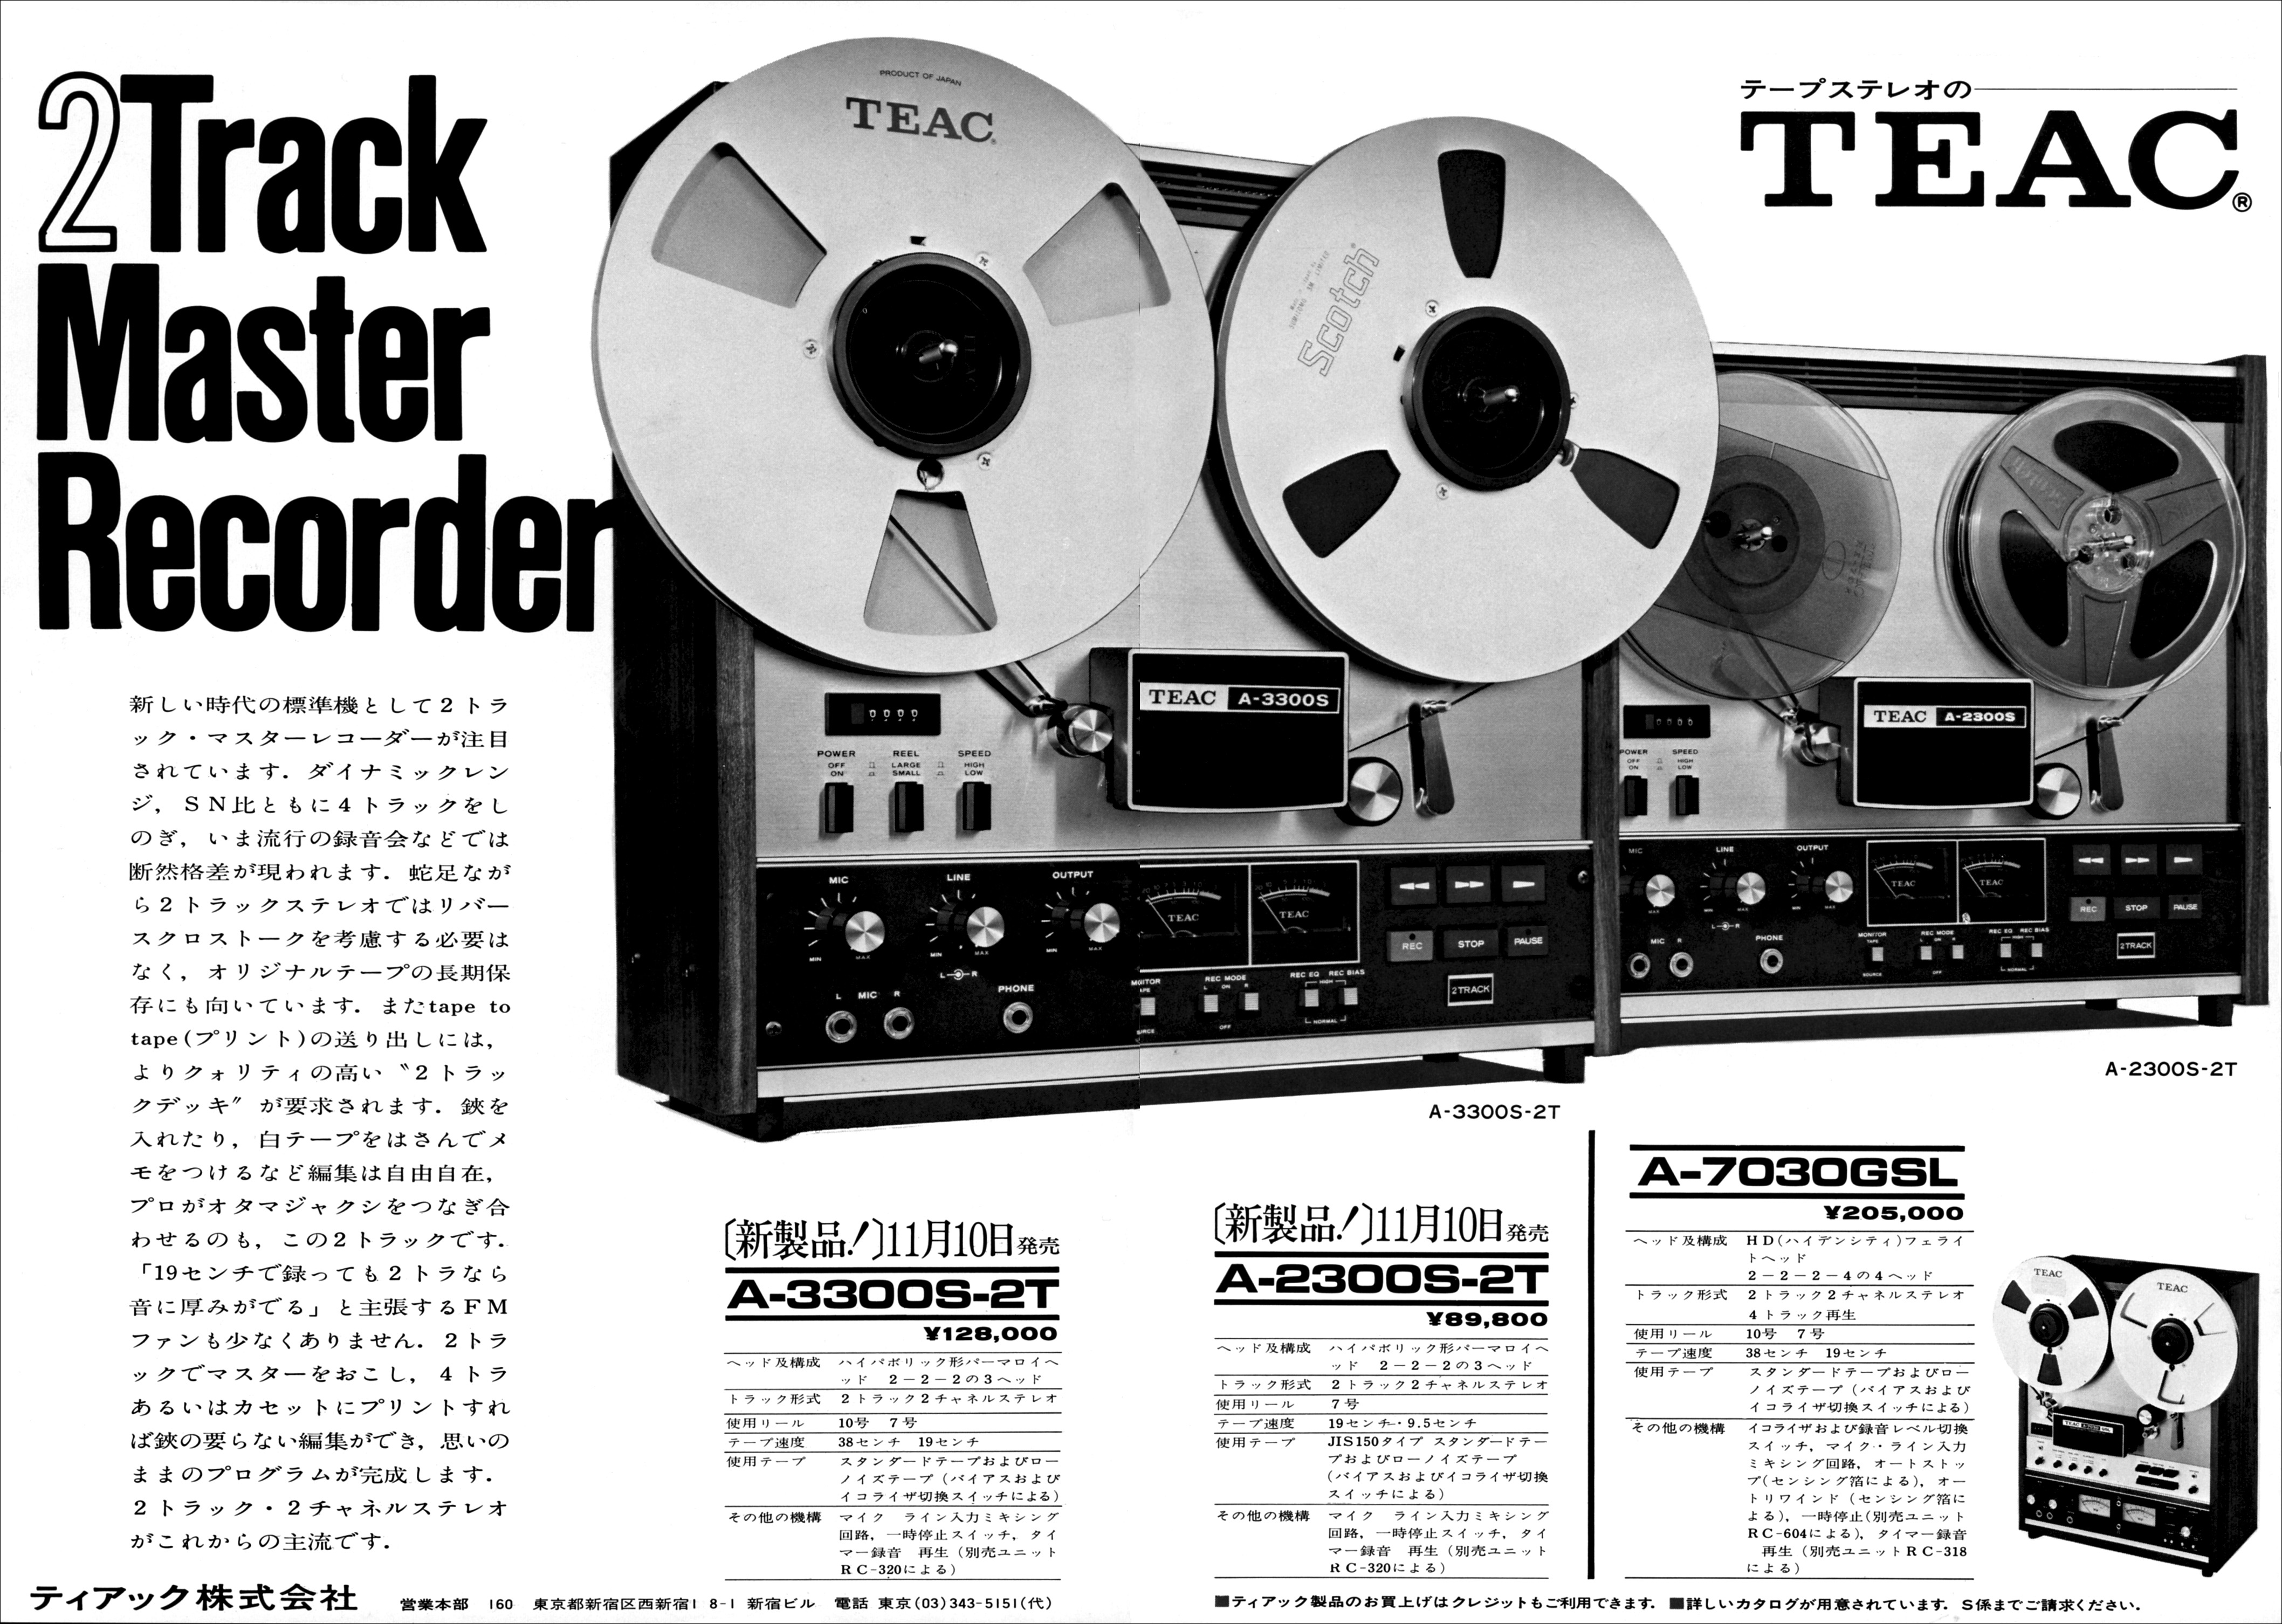 ティアック A-2300S-2T, A-3300S-2T, A-7030GSL | the re:View (in the past)